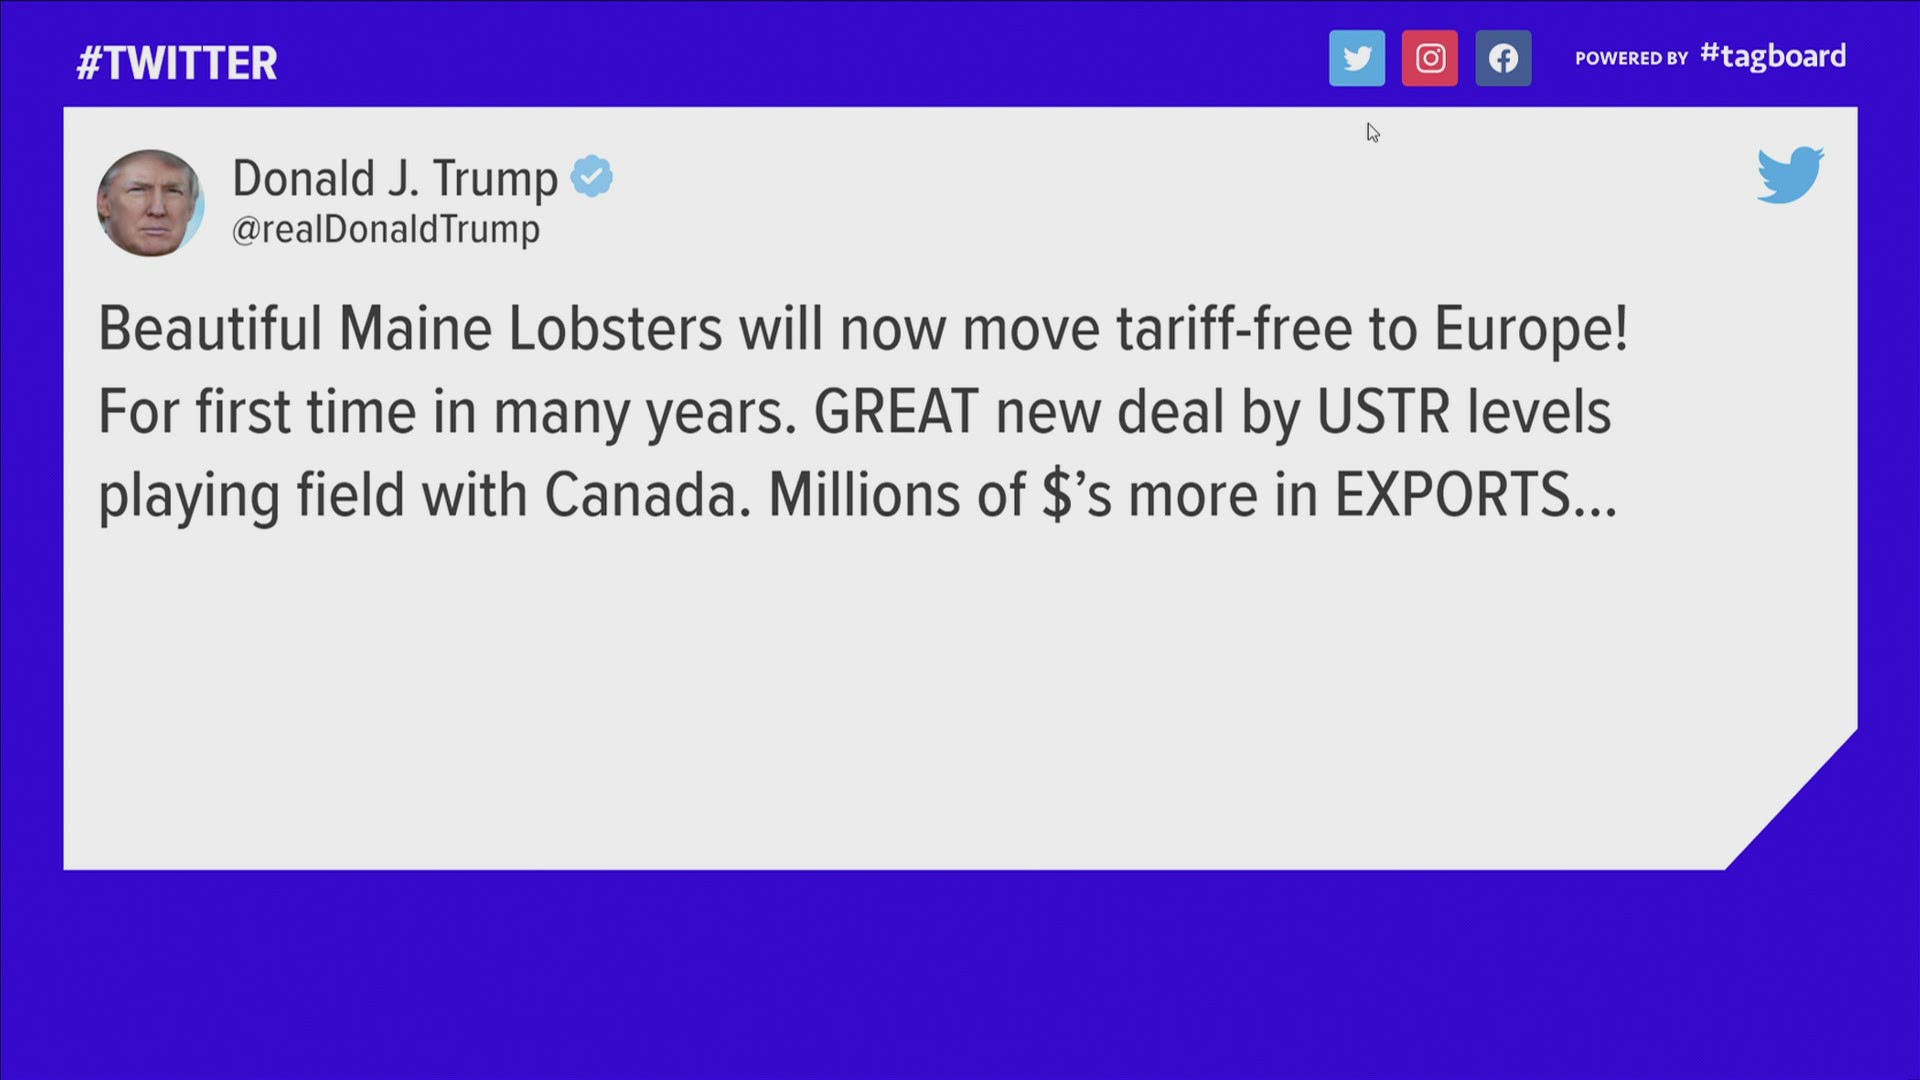 President Trump singles out Maine towns in Tweets about lobster tariffs agreement with EU